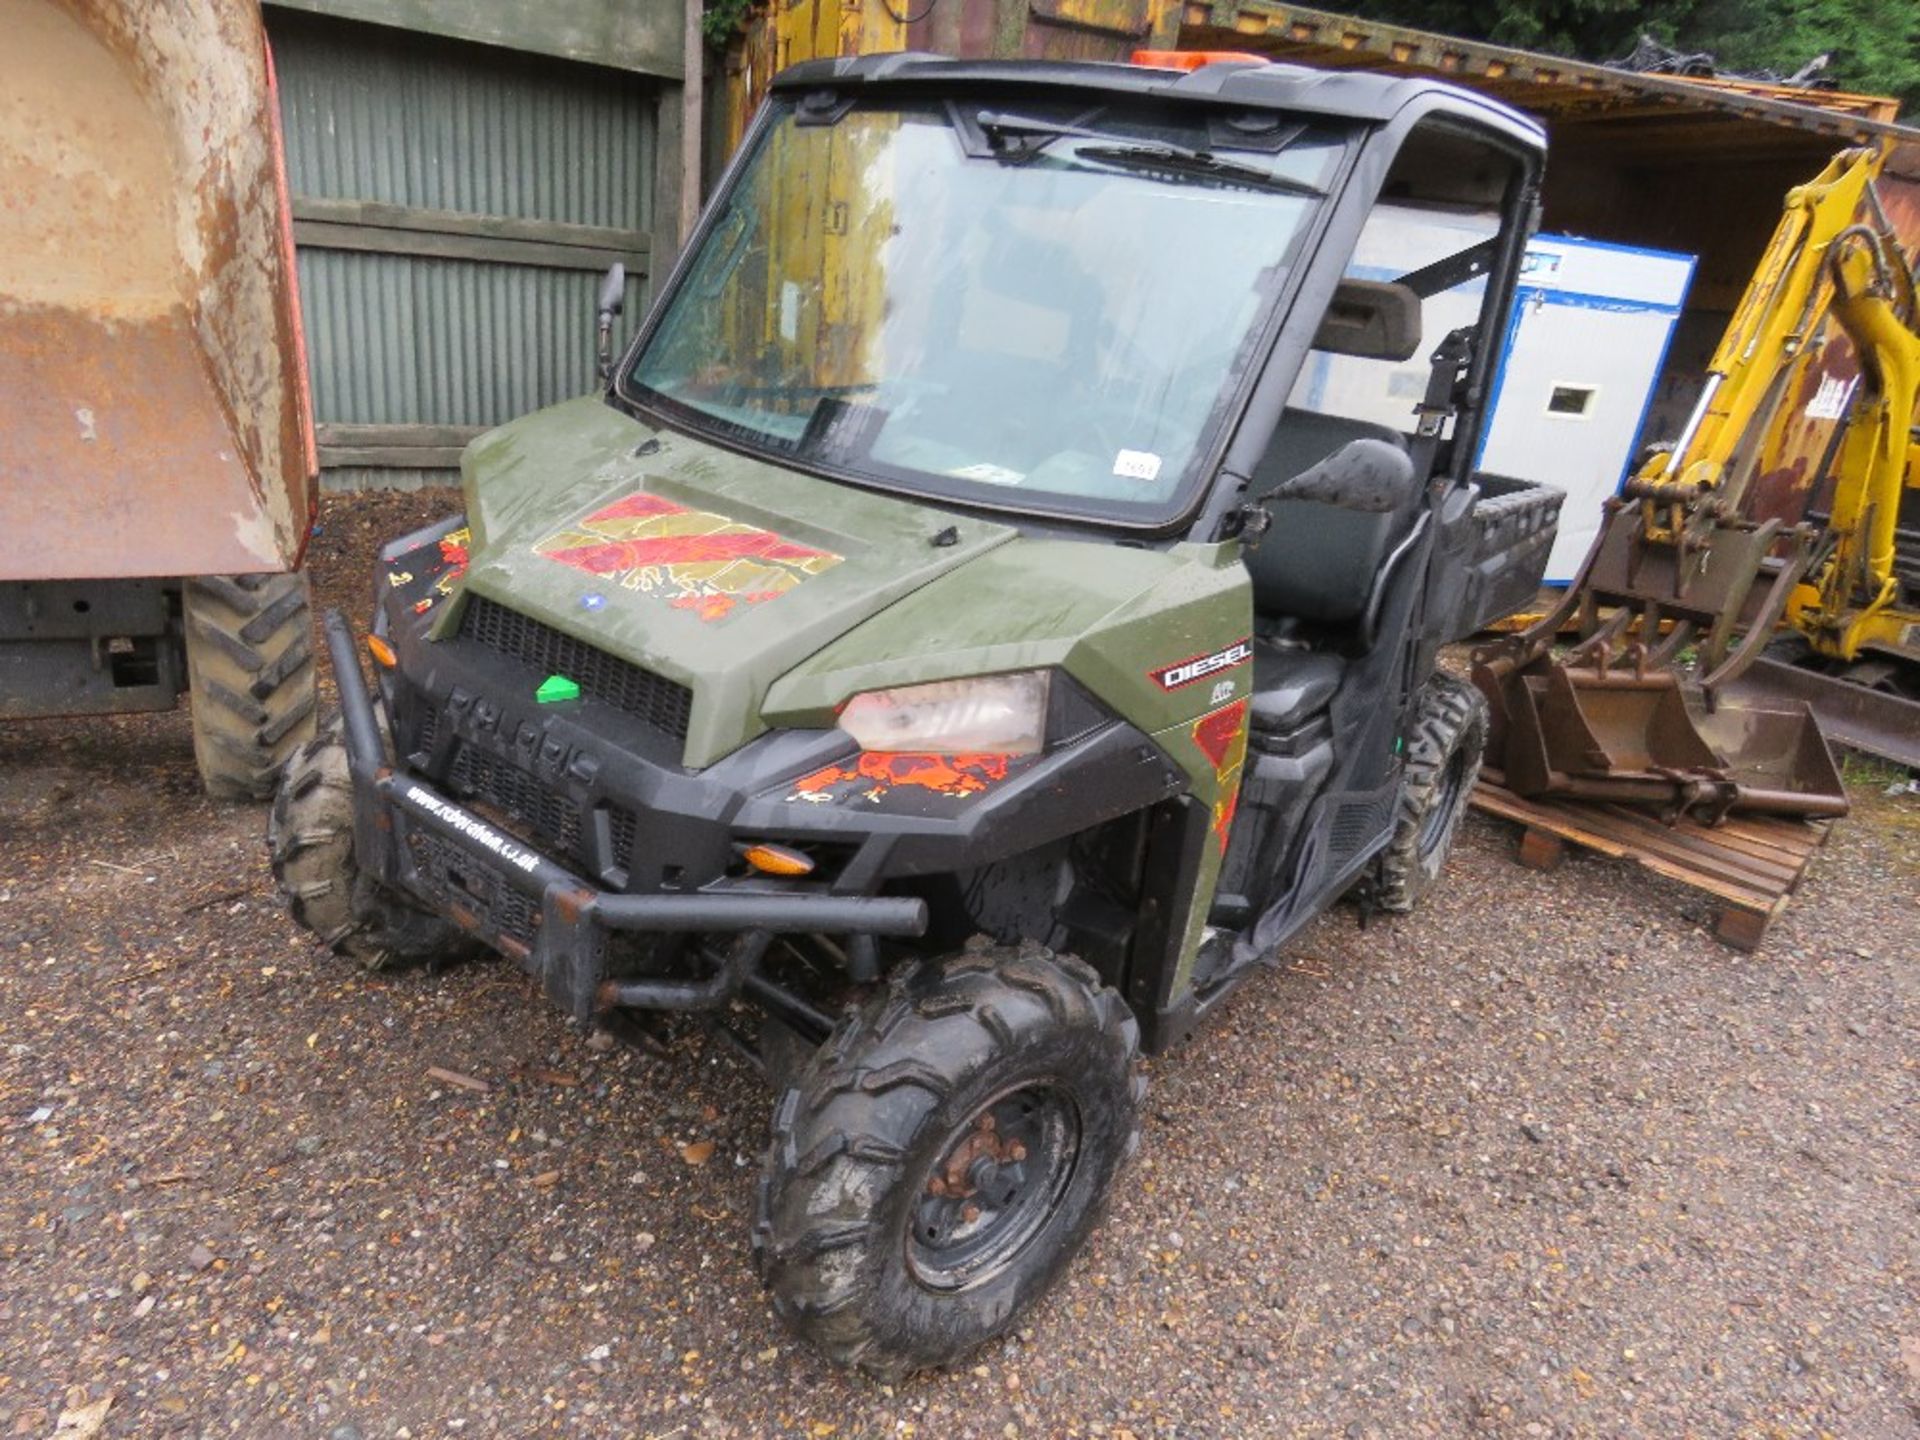 POLARIS RANGER DIESEL RTV BUGGY REG:EU68 EOY. FRONT AND REAR SCREENS AND ROOF. 2018 WITH V5. WHEN TE - Image 12 of 12